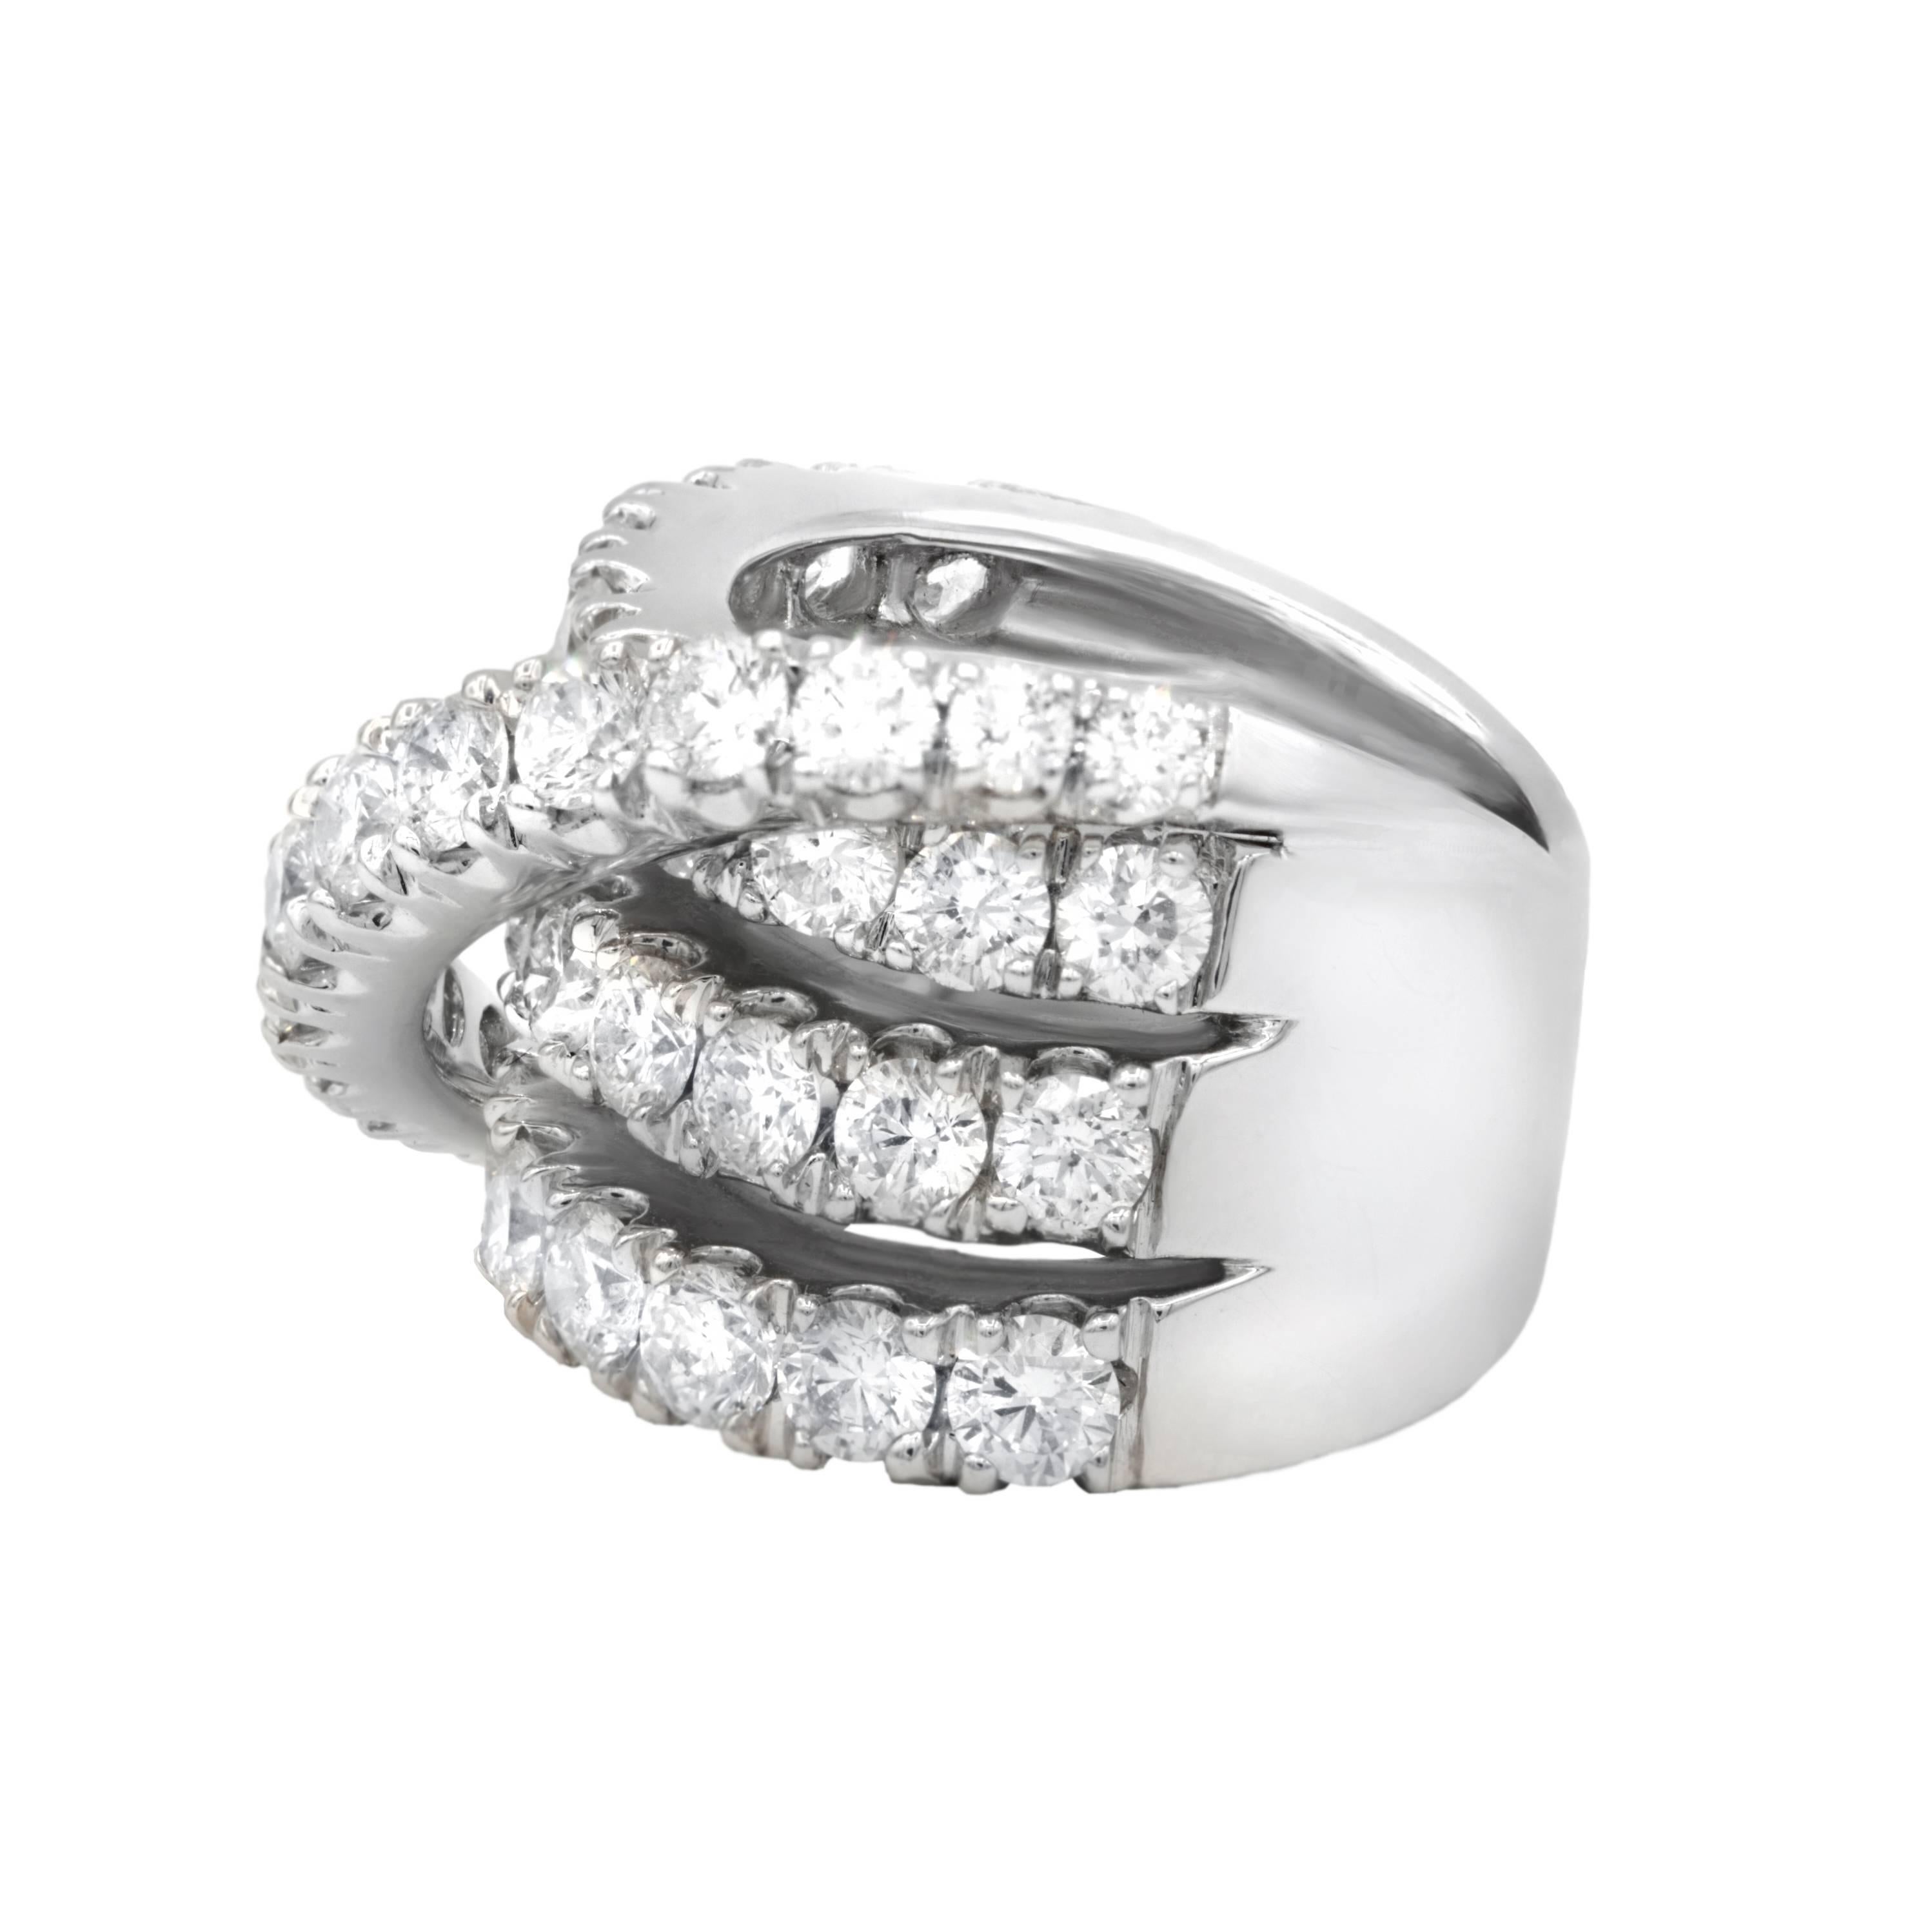 18 karat white gold fancy diamond ring consisting of 7.50 TCW round brilliant cut diamonds FG color/VS SI clarity  and set as 3 rows and cross with one row.